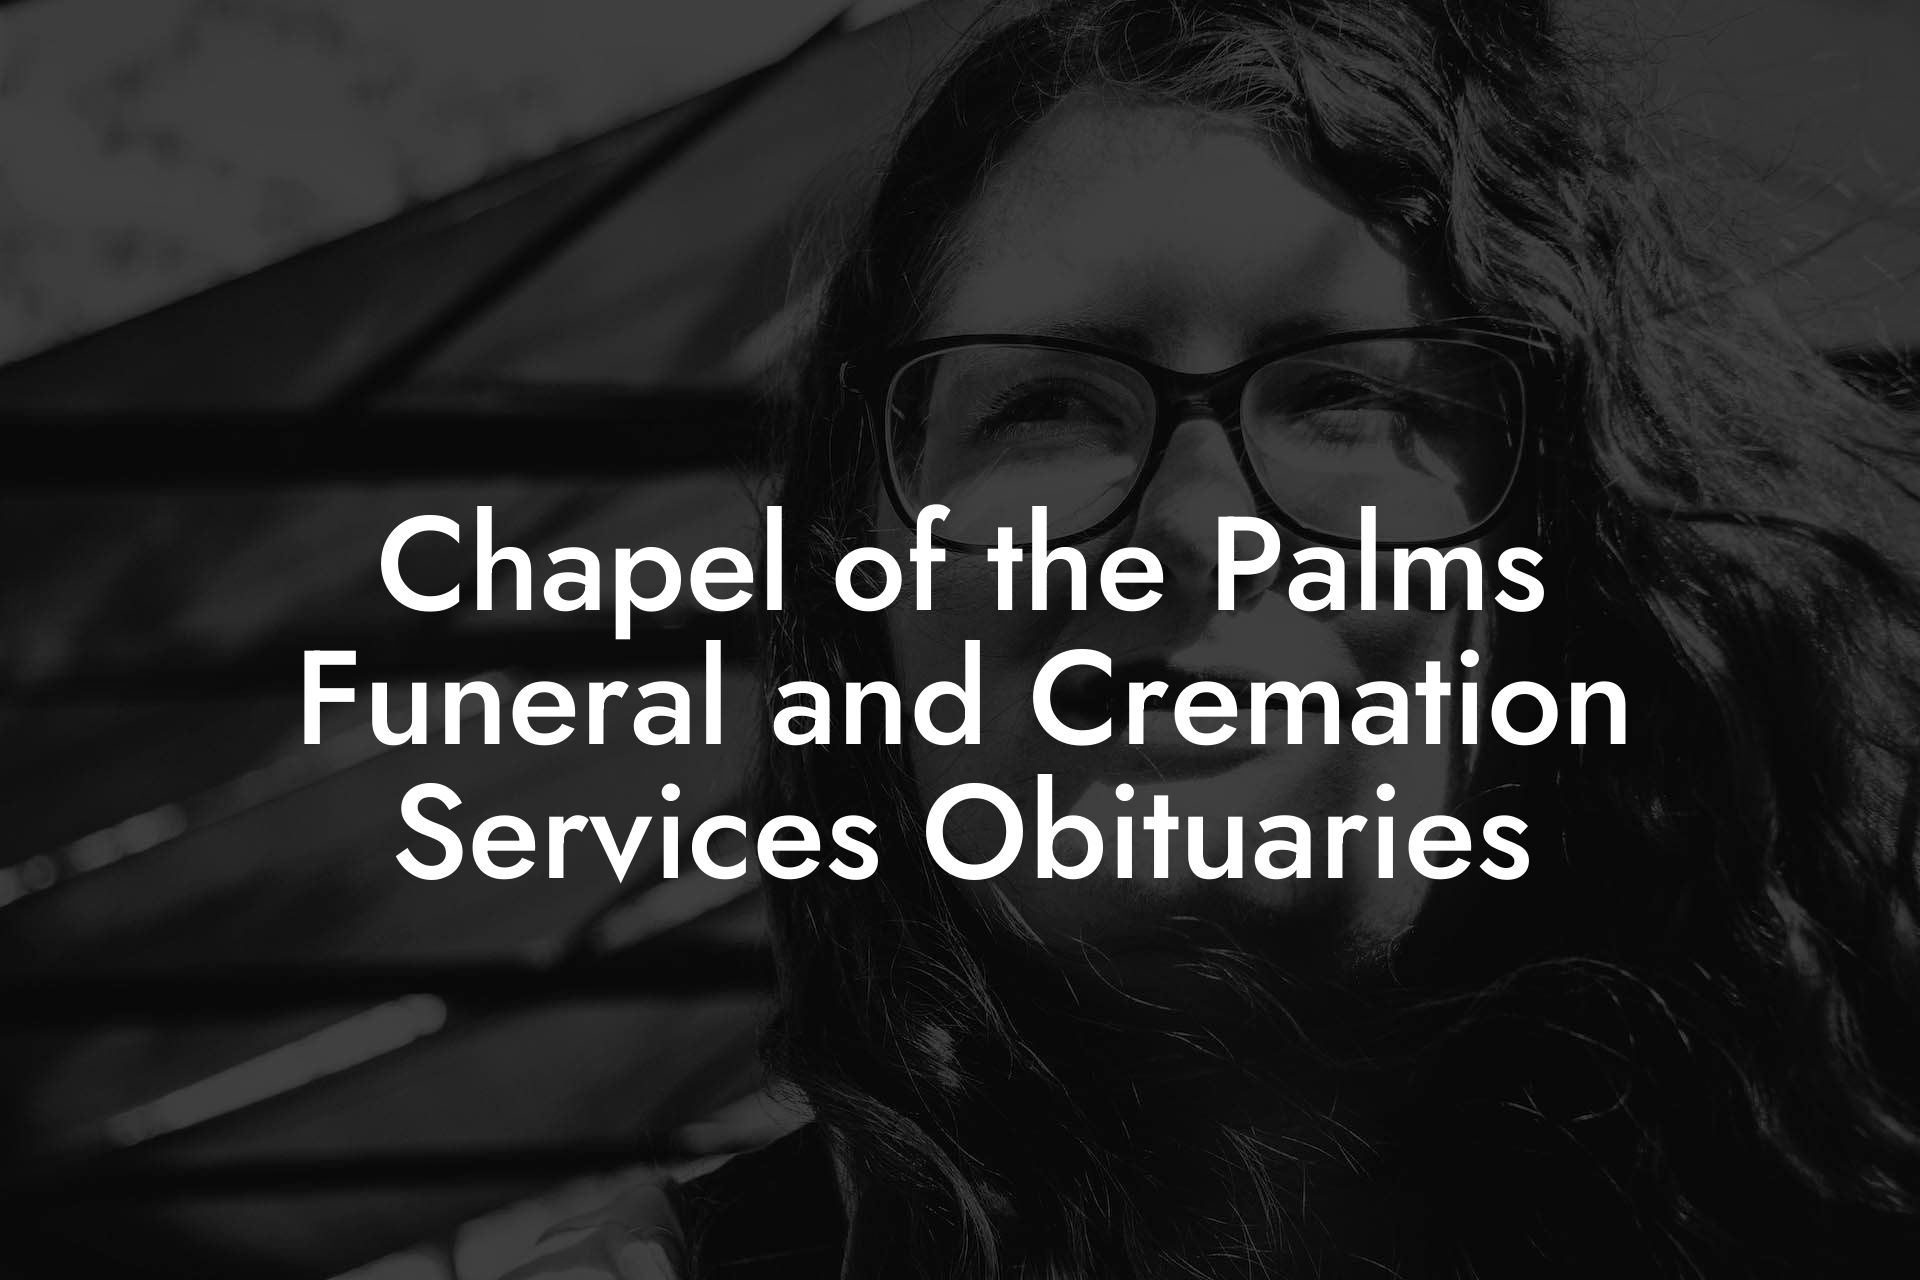 Chapel of the Palms Funeral and Cremation Services Obituaries